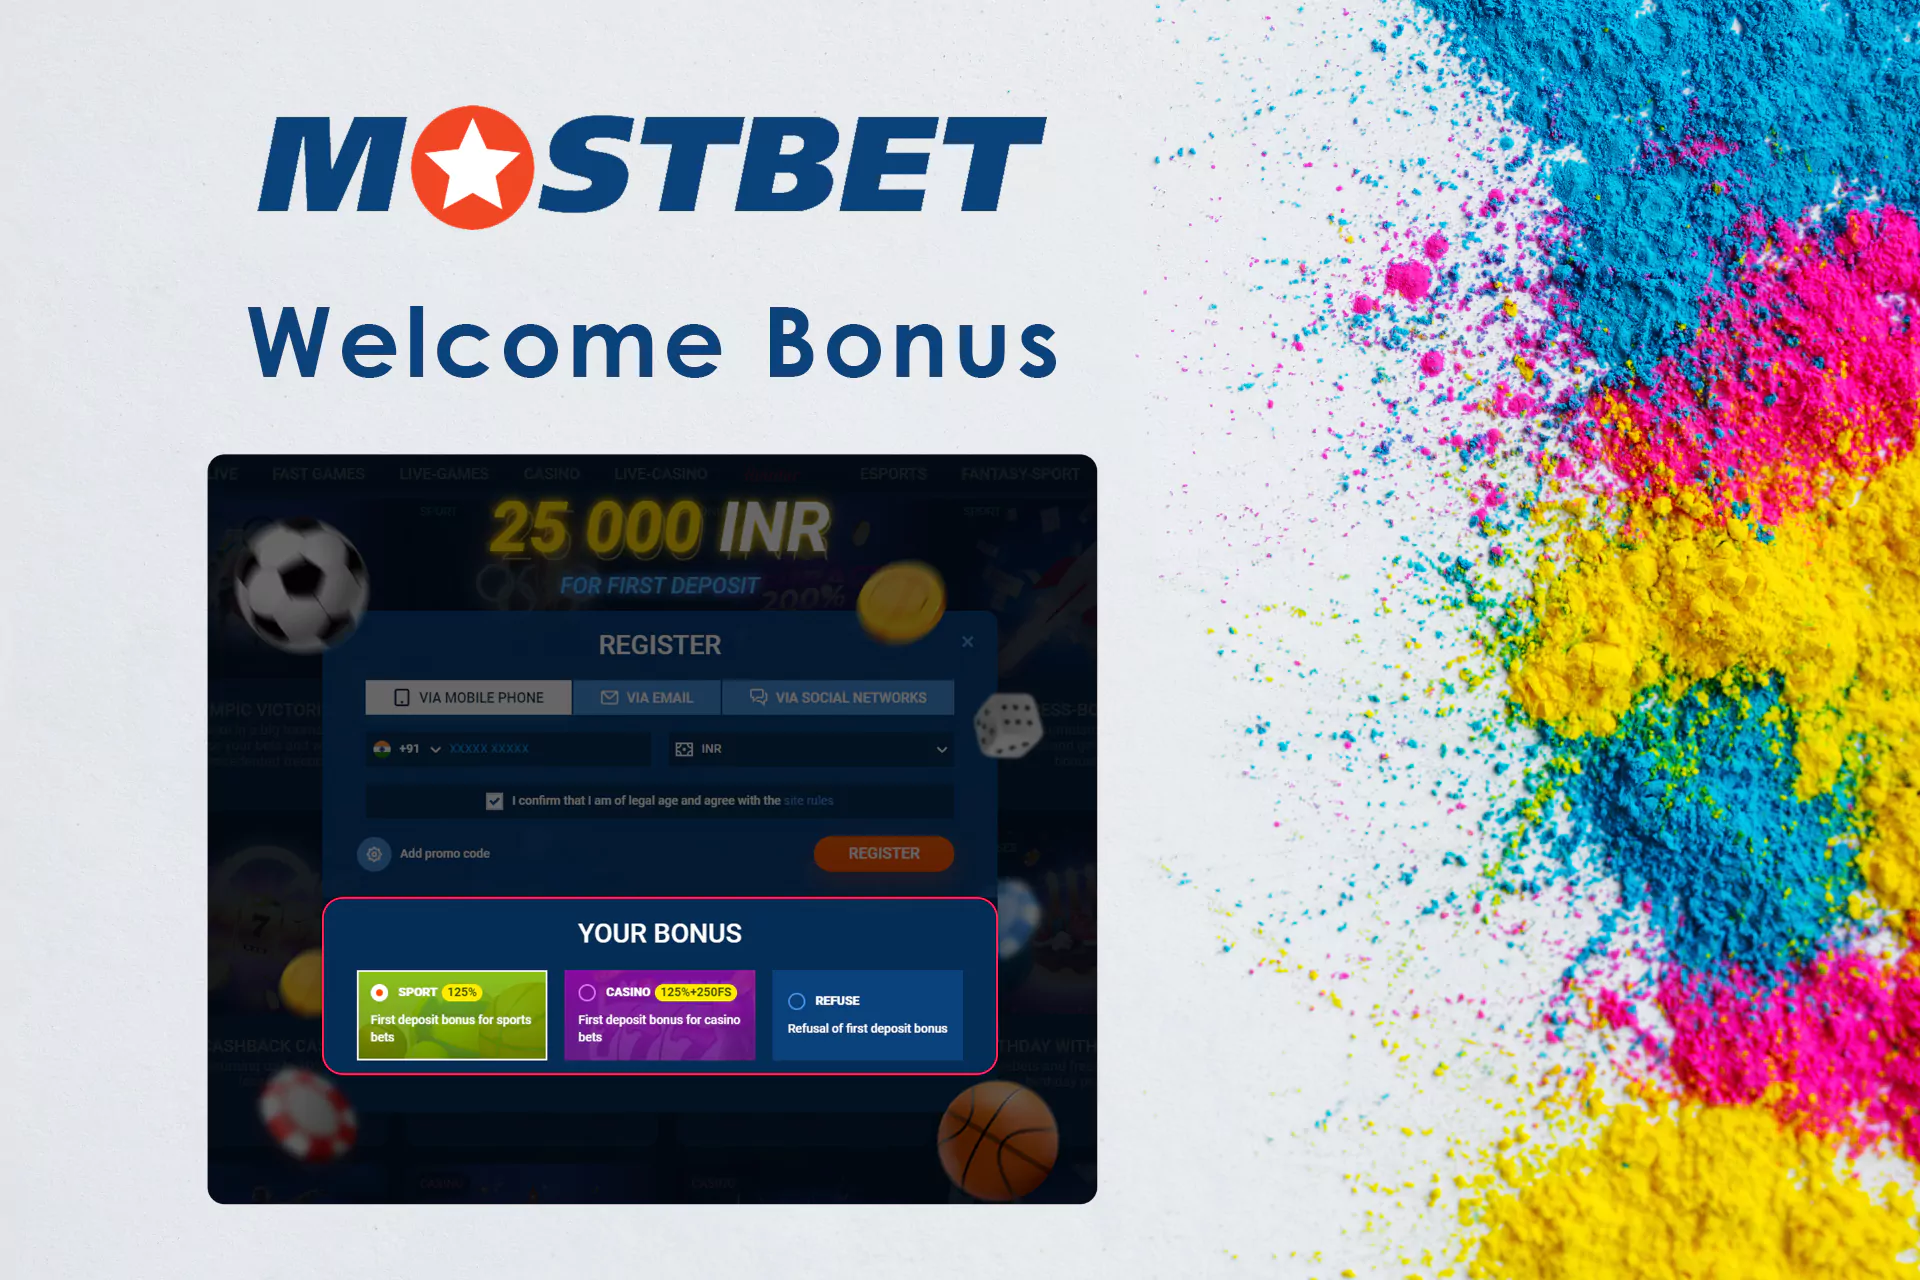 After completing the registration and making your first deposit you can claim a bonus for new users.